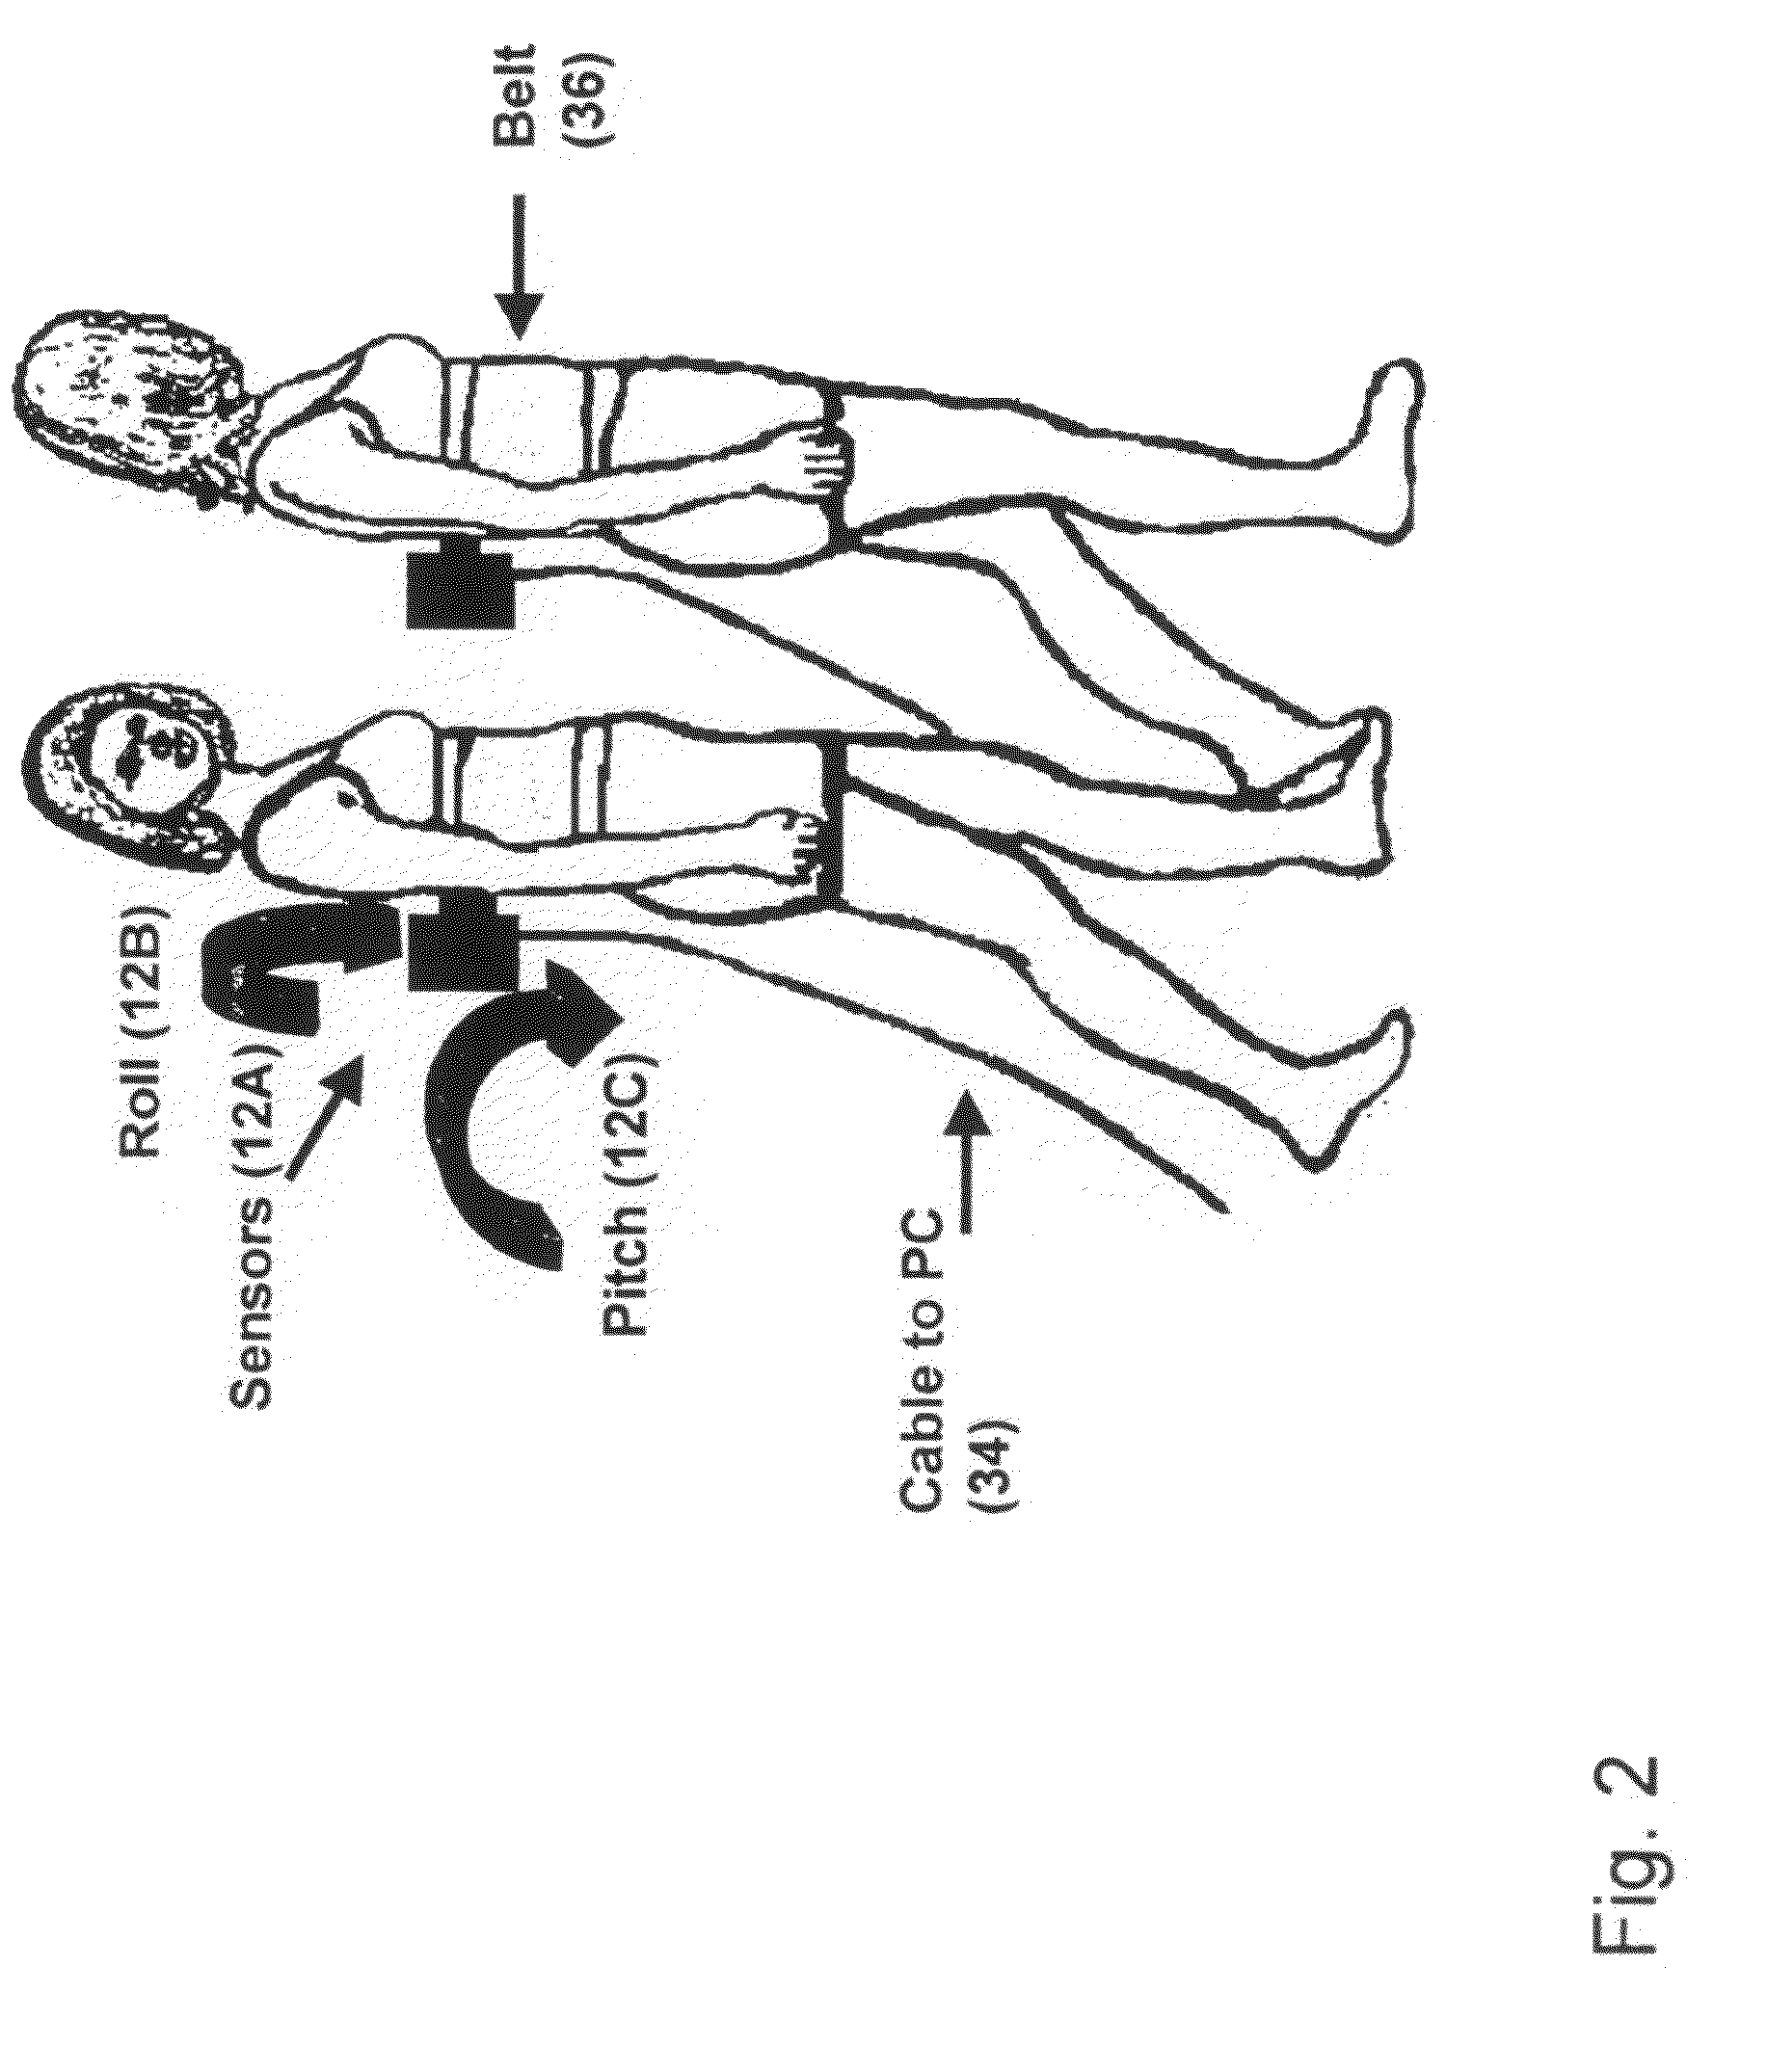 System and Method for Providing Body Sway Feedback to a Body of a Subject